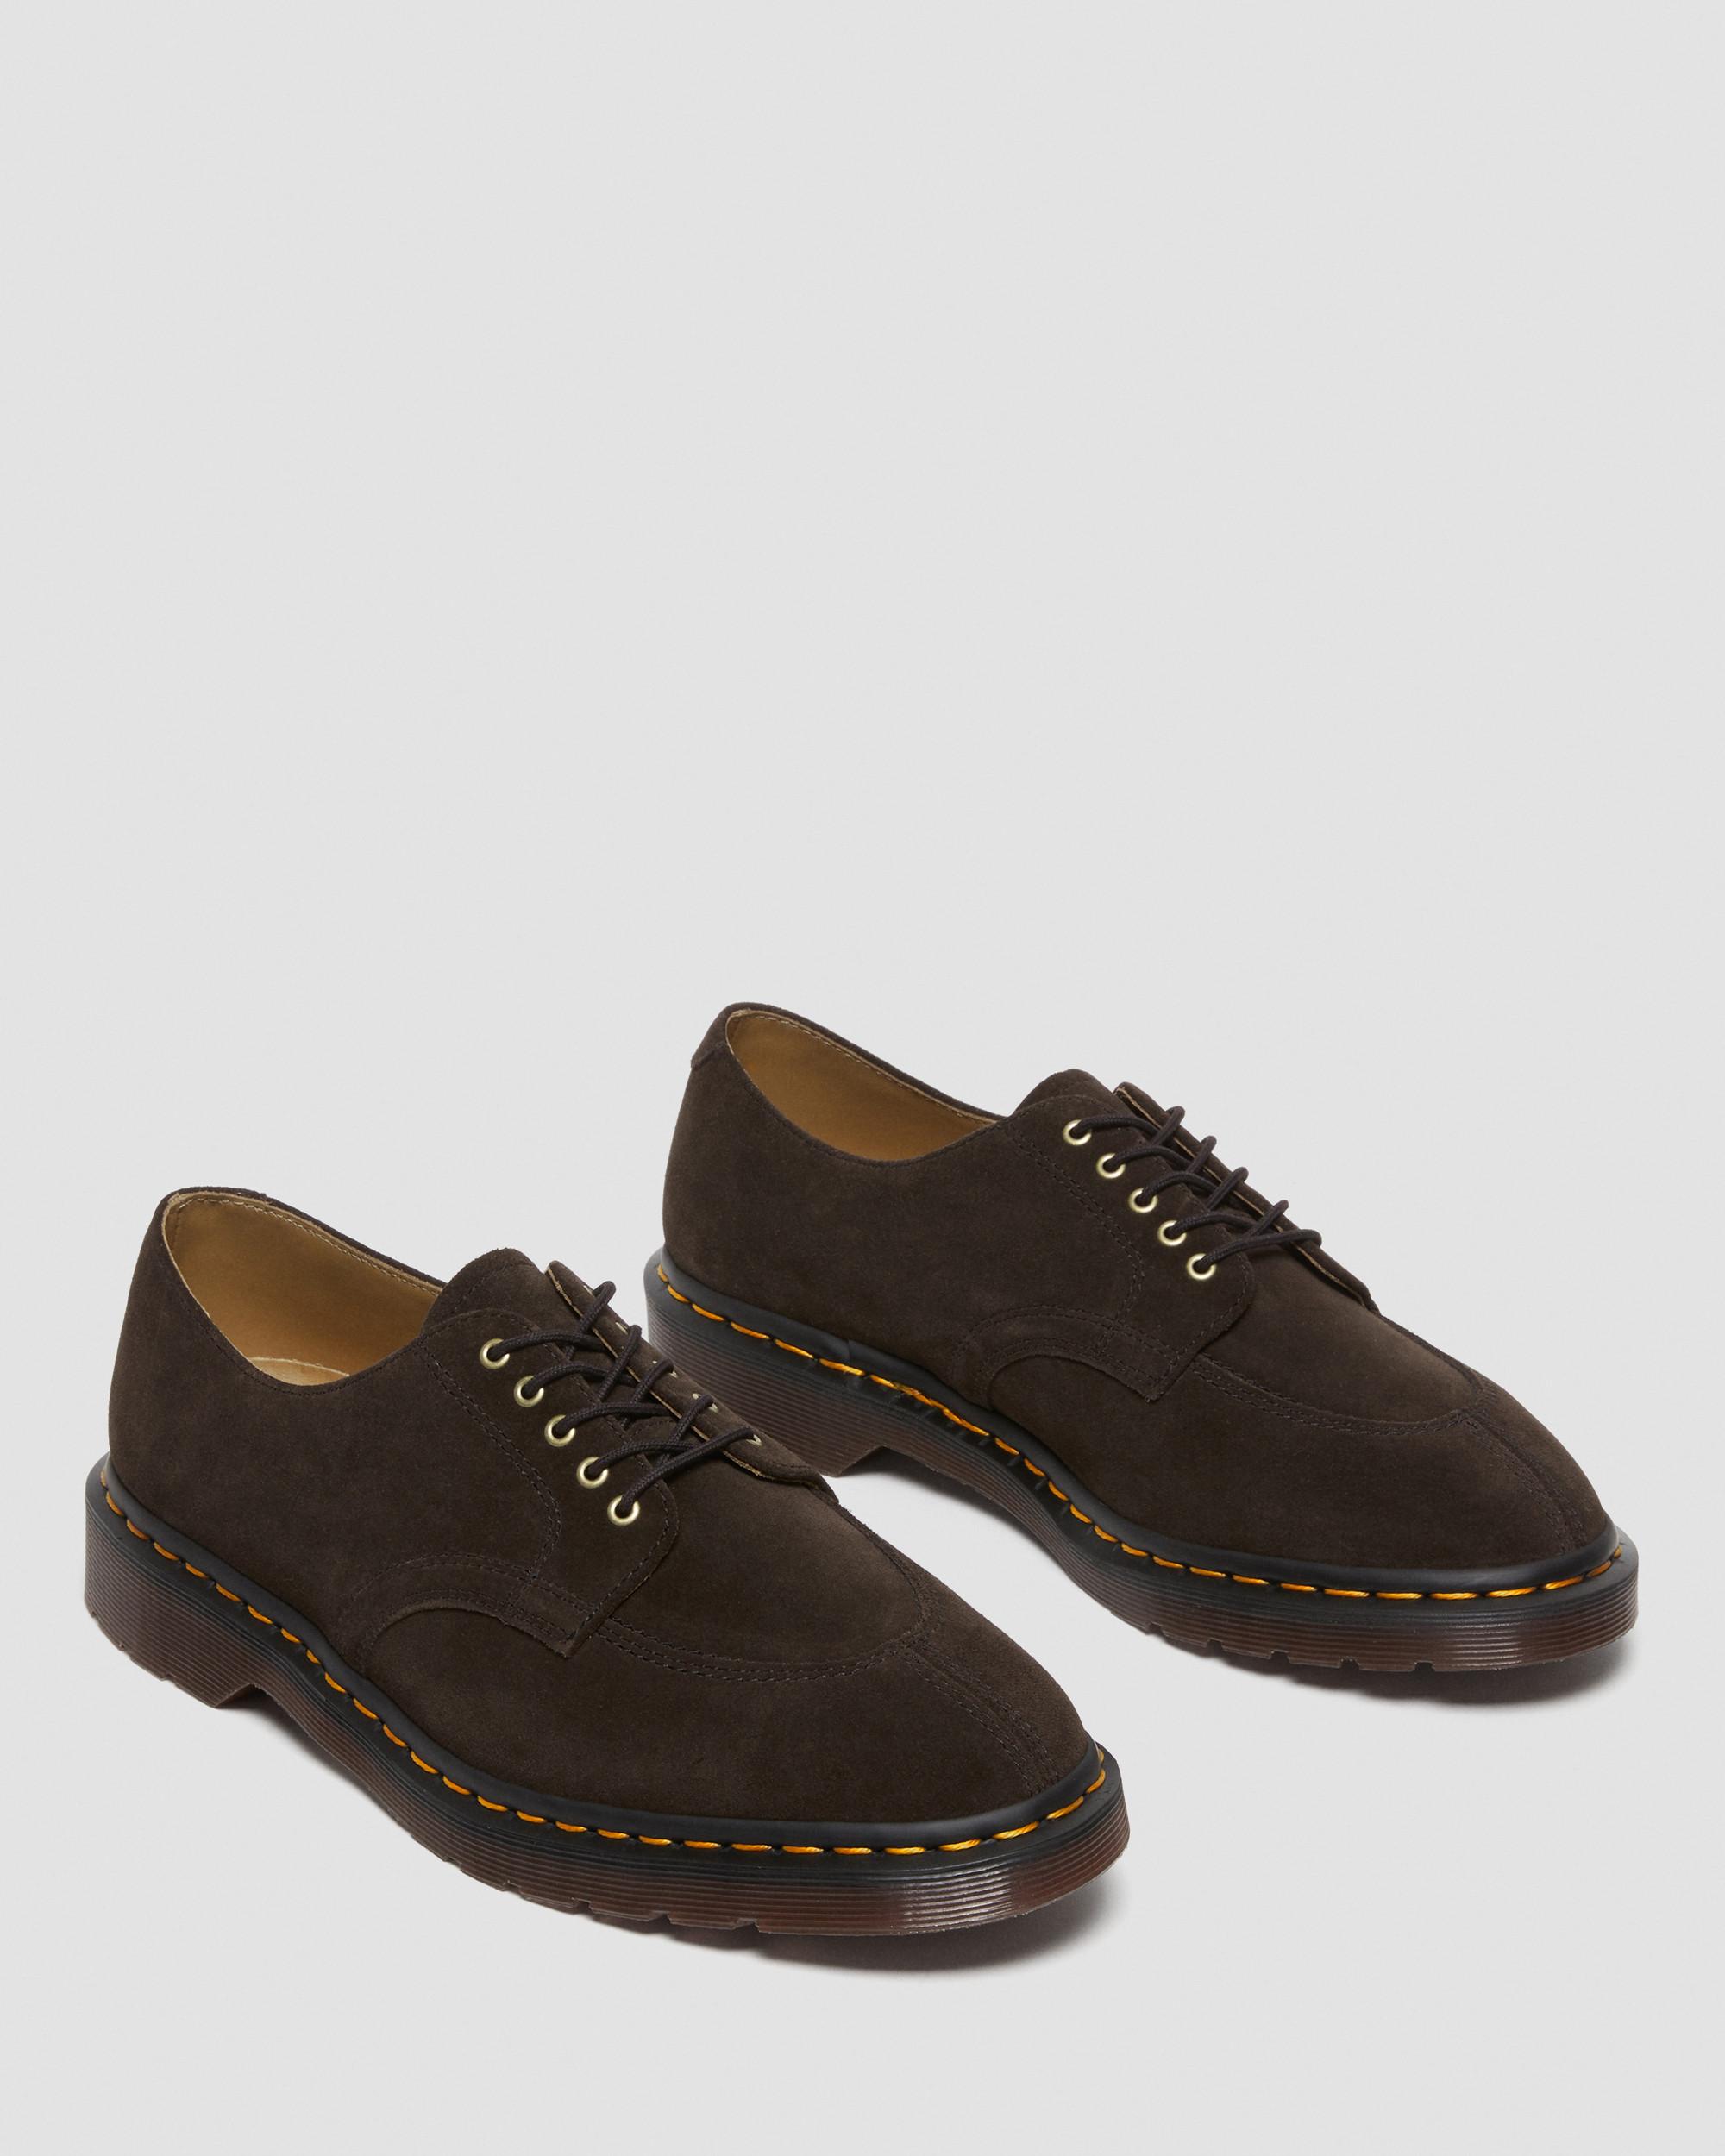 2046 Suede Shoes in Brown